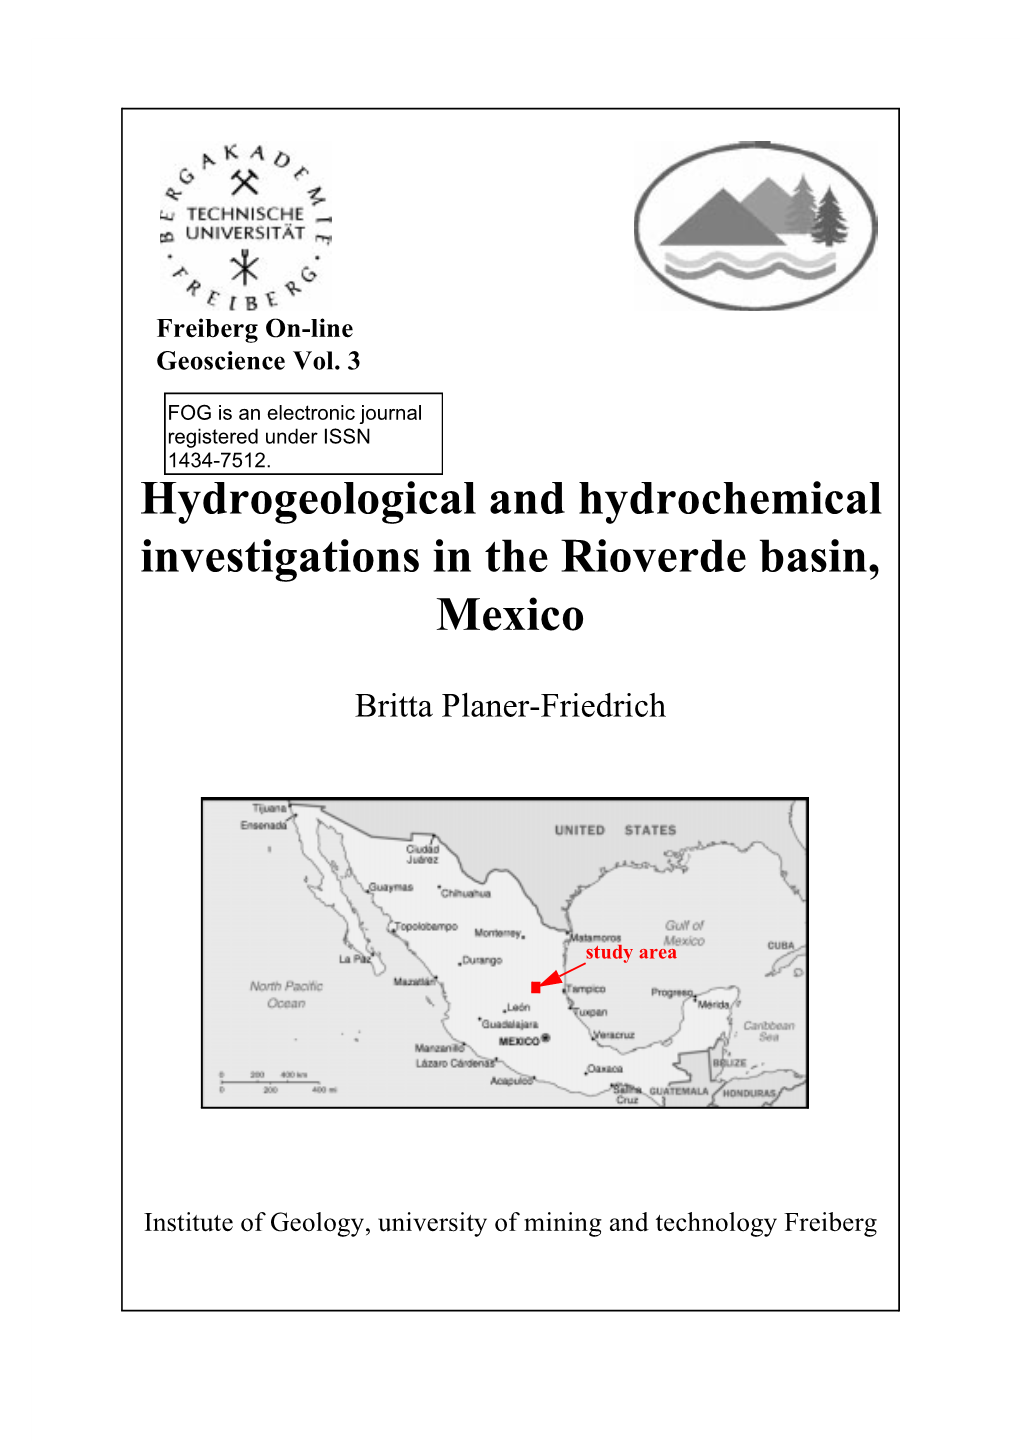 Hydrogeological and Hydrochemical Investigations in the Rioverde Basin, Mexico